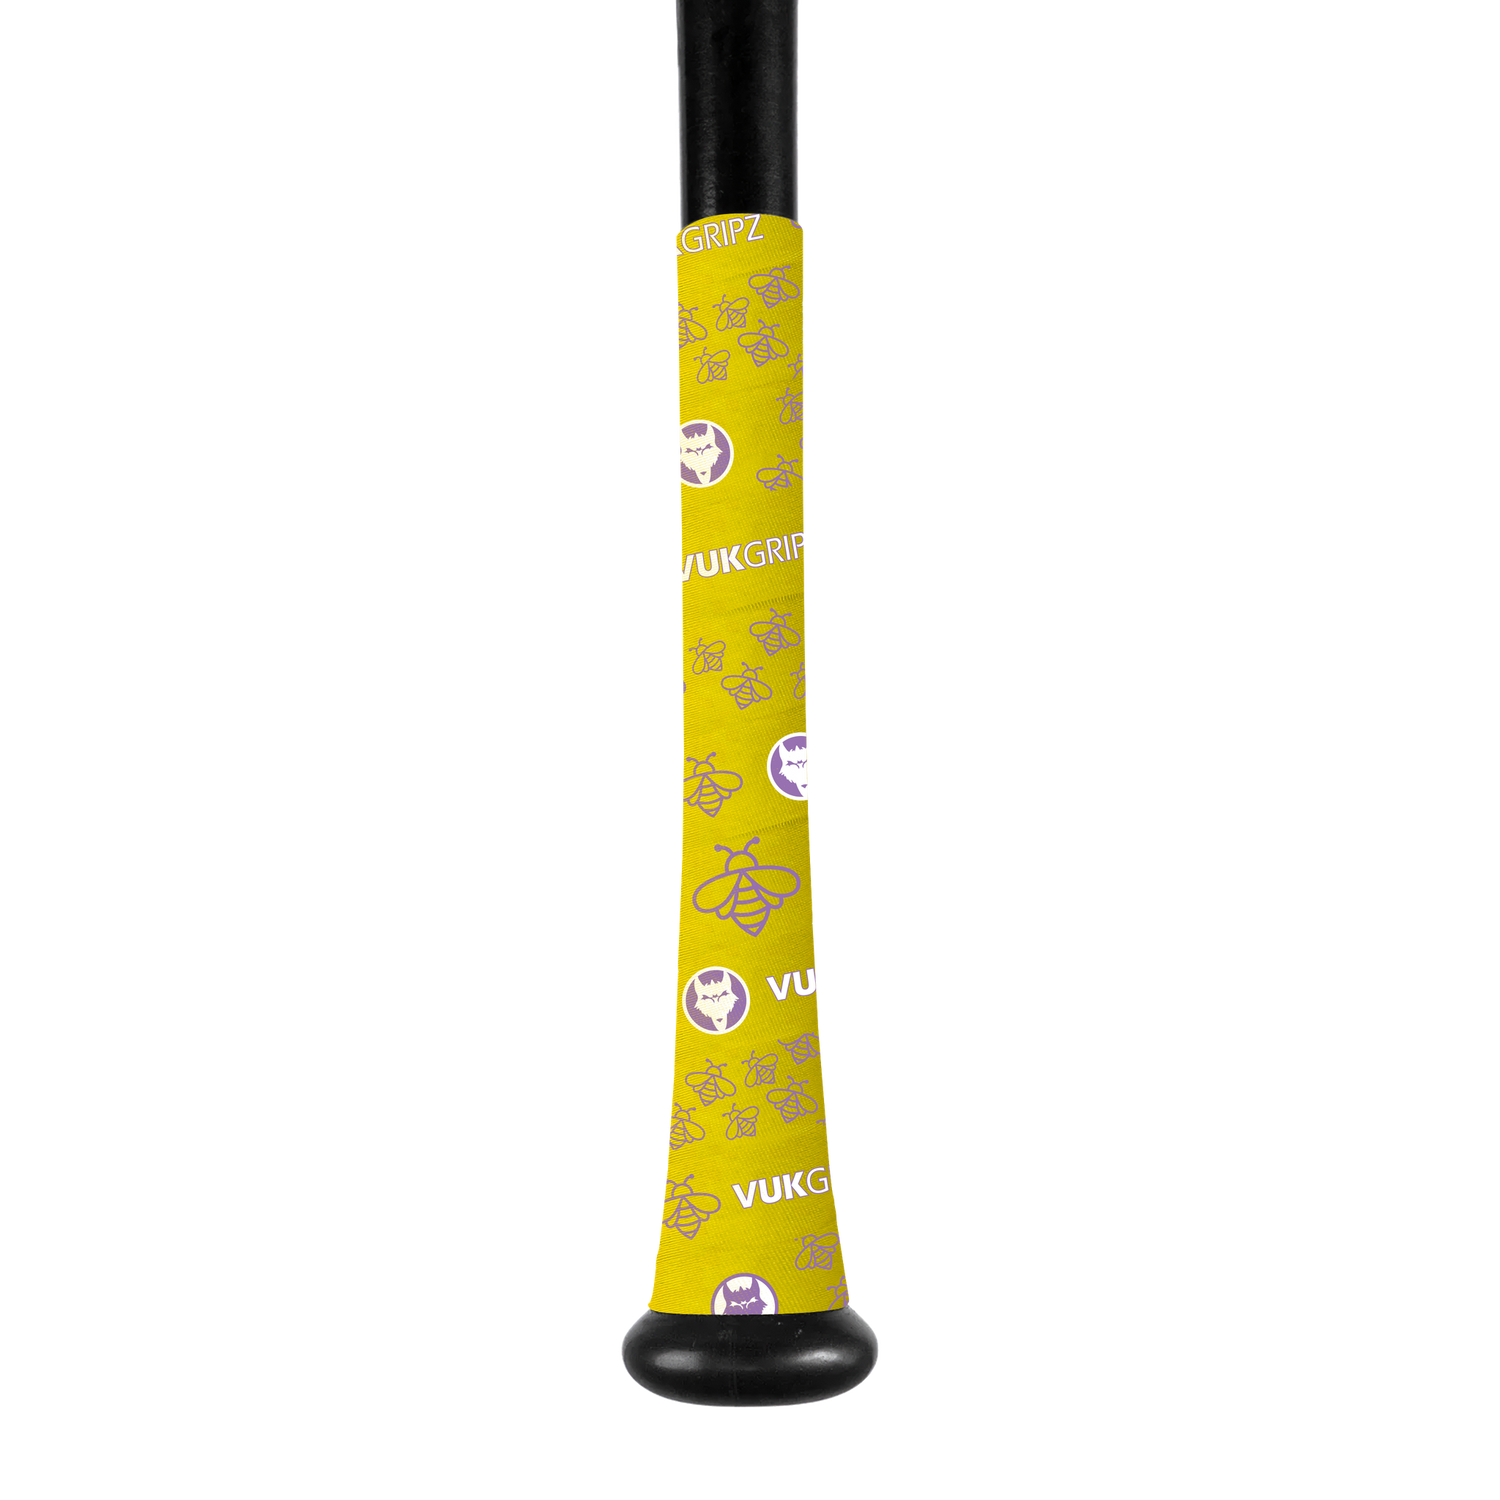 Bumble Bee baseball, bat grip tape for fastpitch